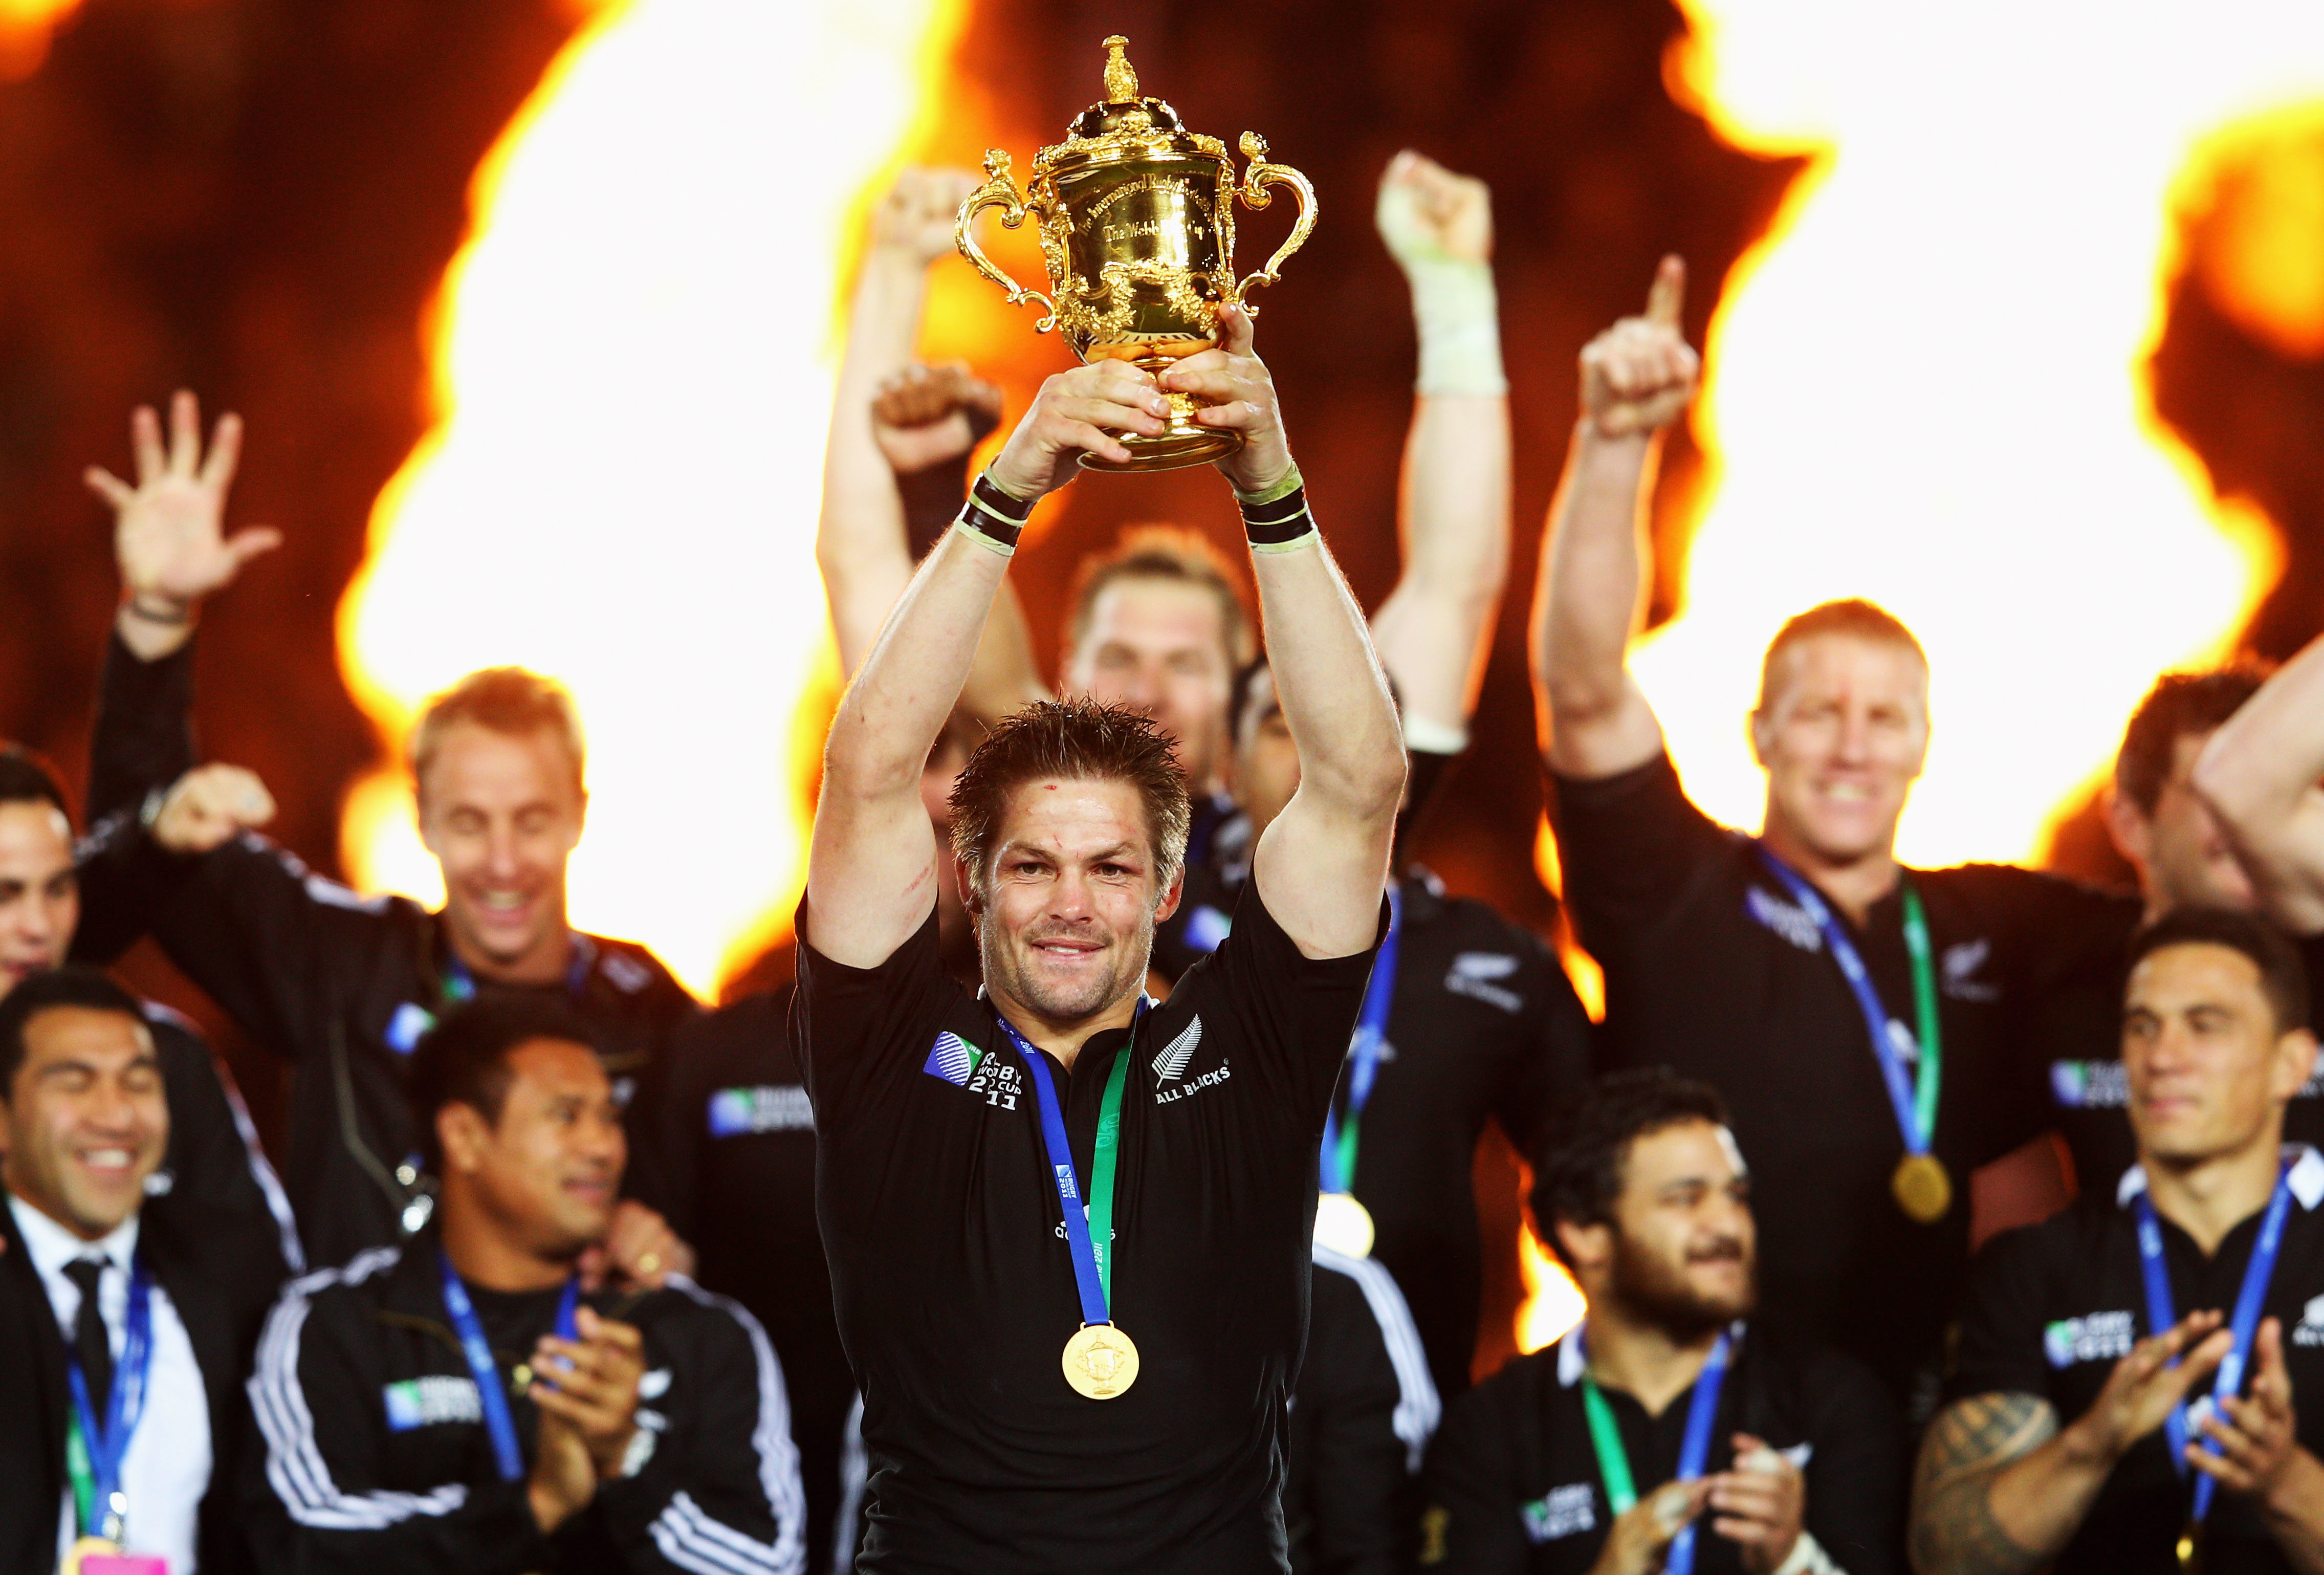 Richie McCaw celebrates winning the 2011 Rugby World Cup at Eden Park.